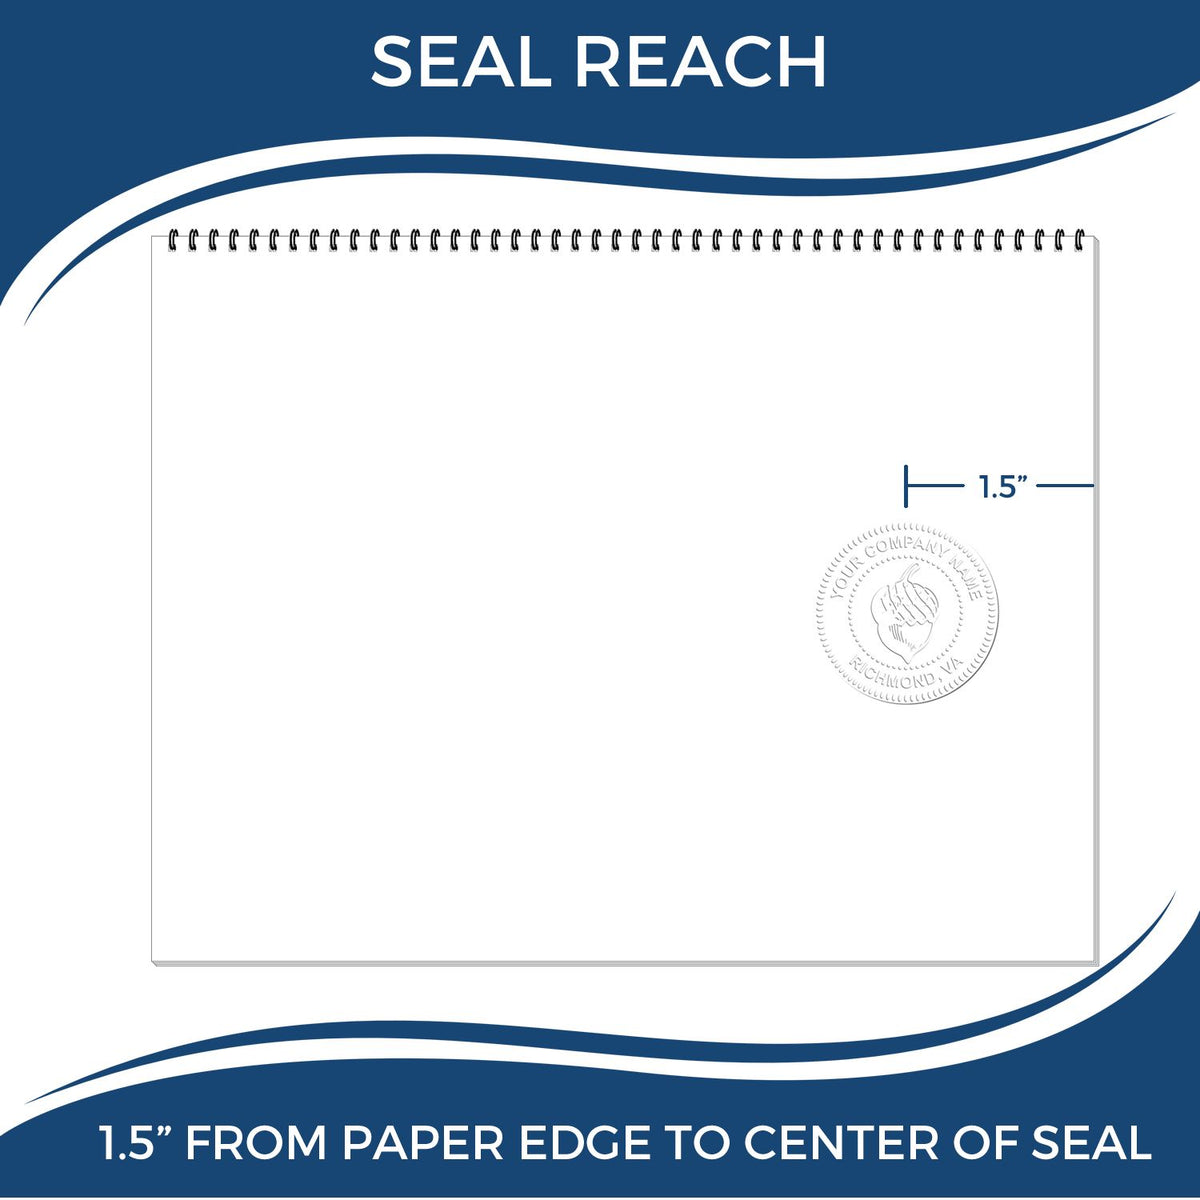 An infographic showing the seal reach which is represented by a ruler and a miniature seal image of the Hybrid Hawaii Geologist Seal